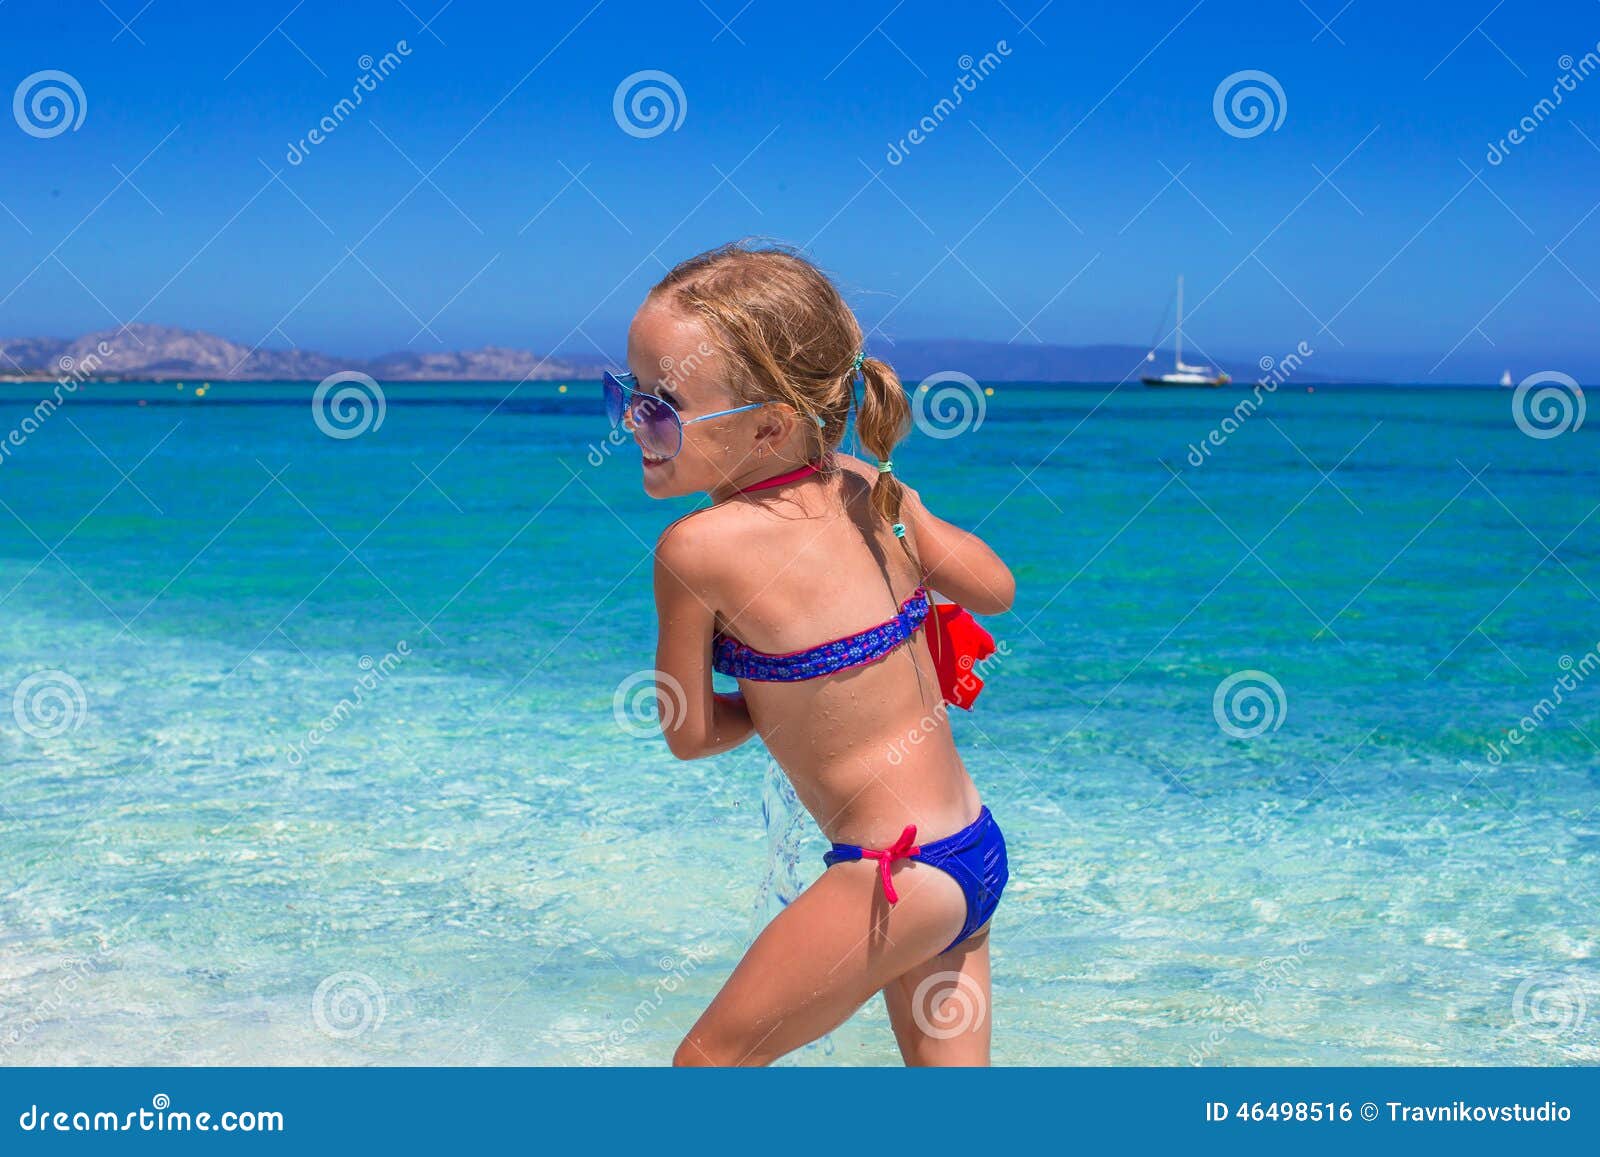 adorable little girl playing with toy on beach